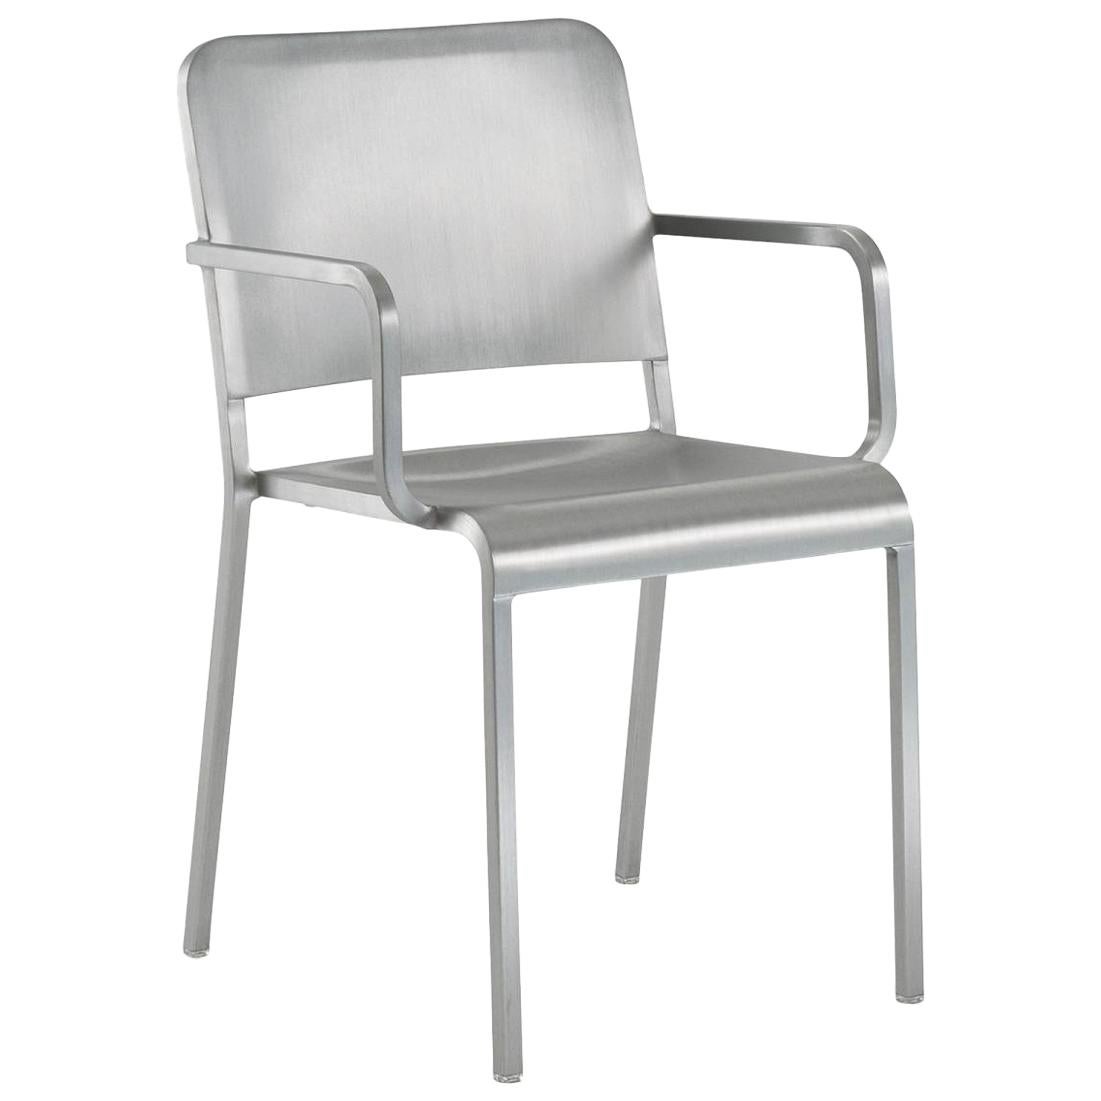 Emeco 20-06 Armchair in Brushed Aluminum by Norman Foster